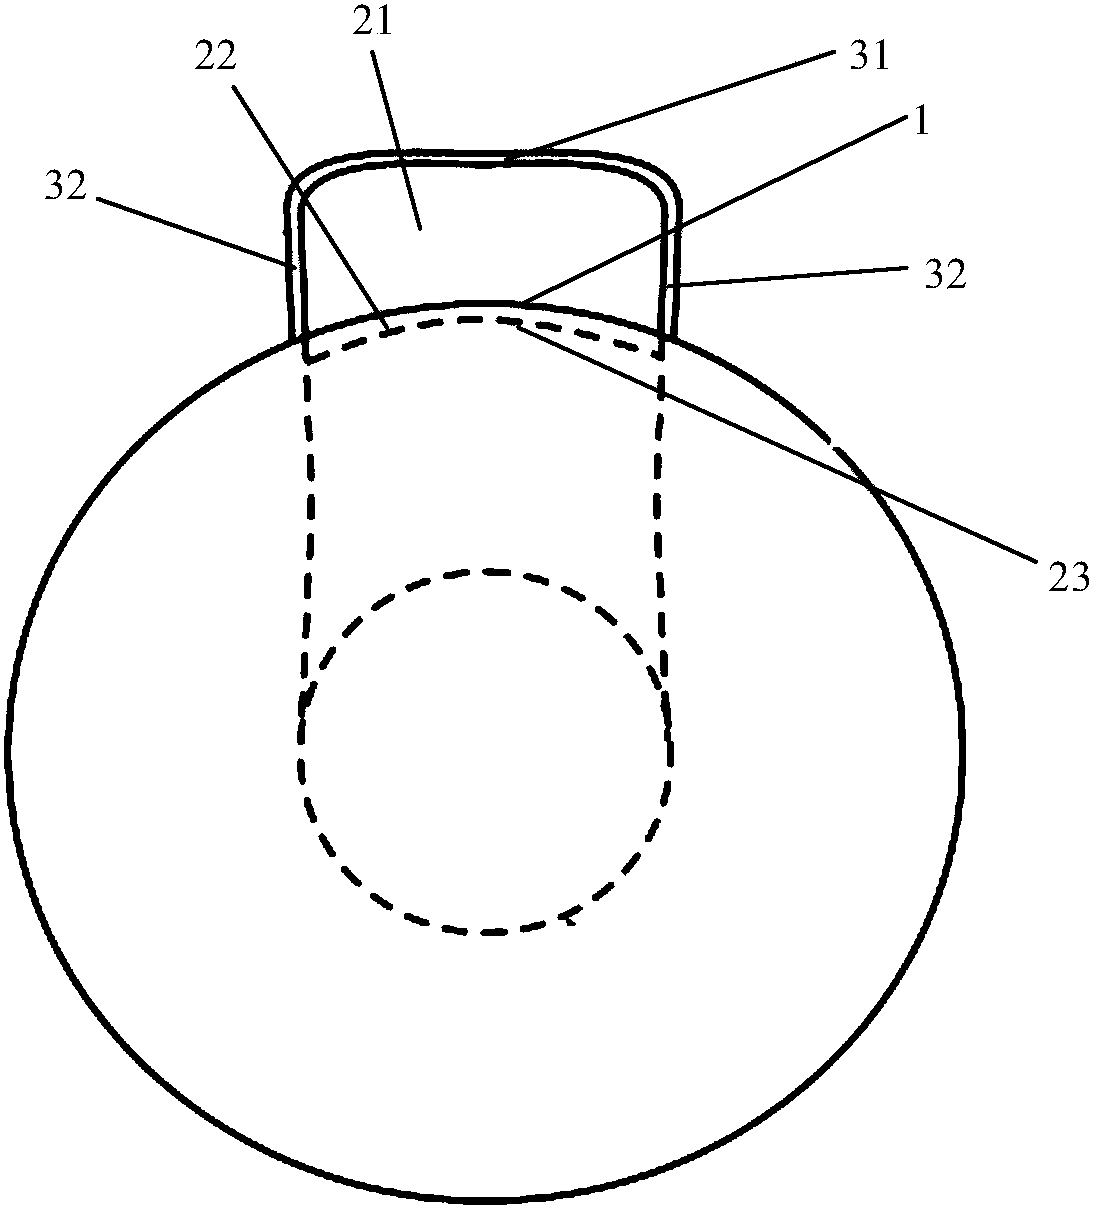 A subsonic air inlet integrated with aircraft without partition